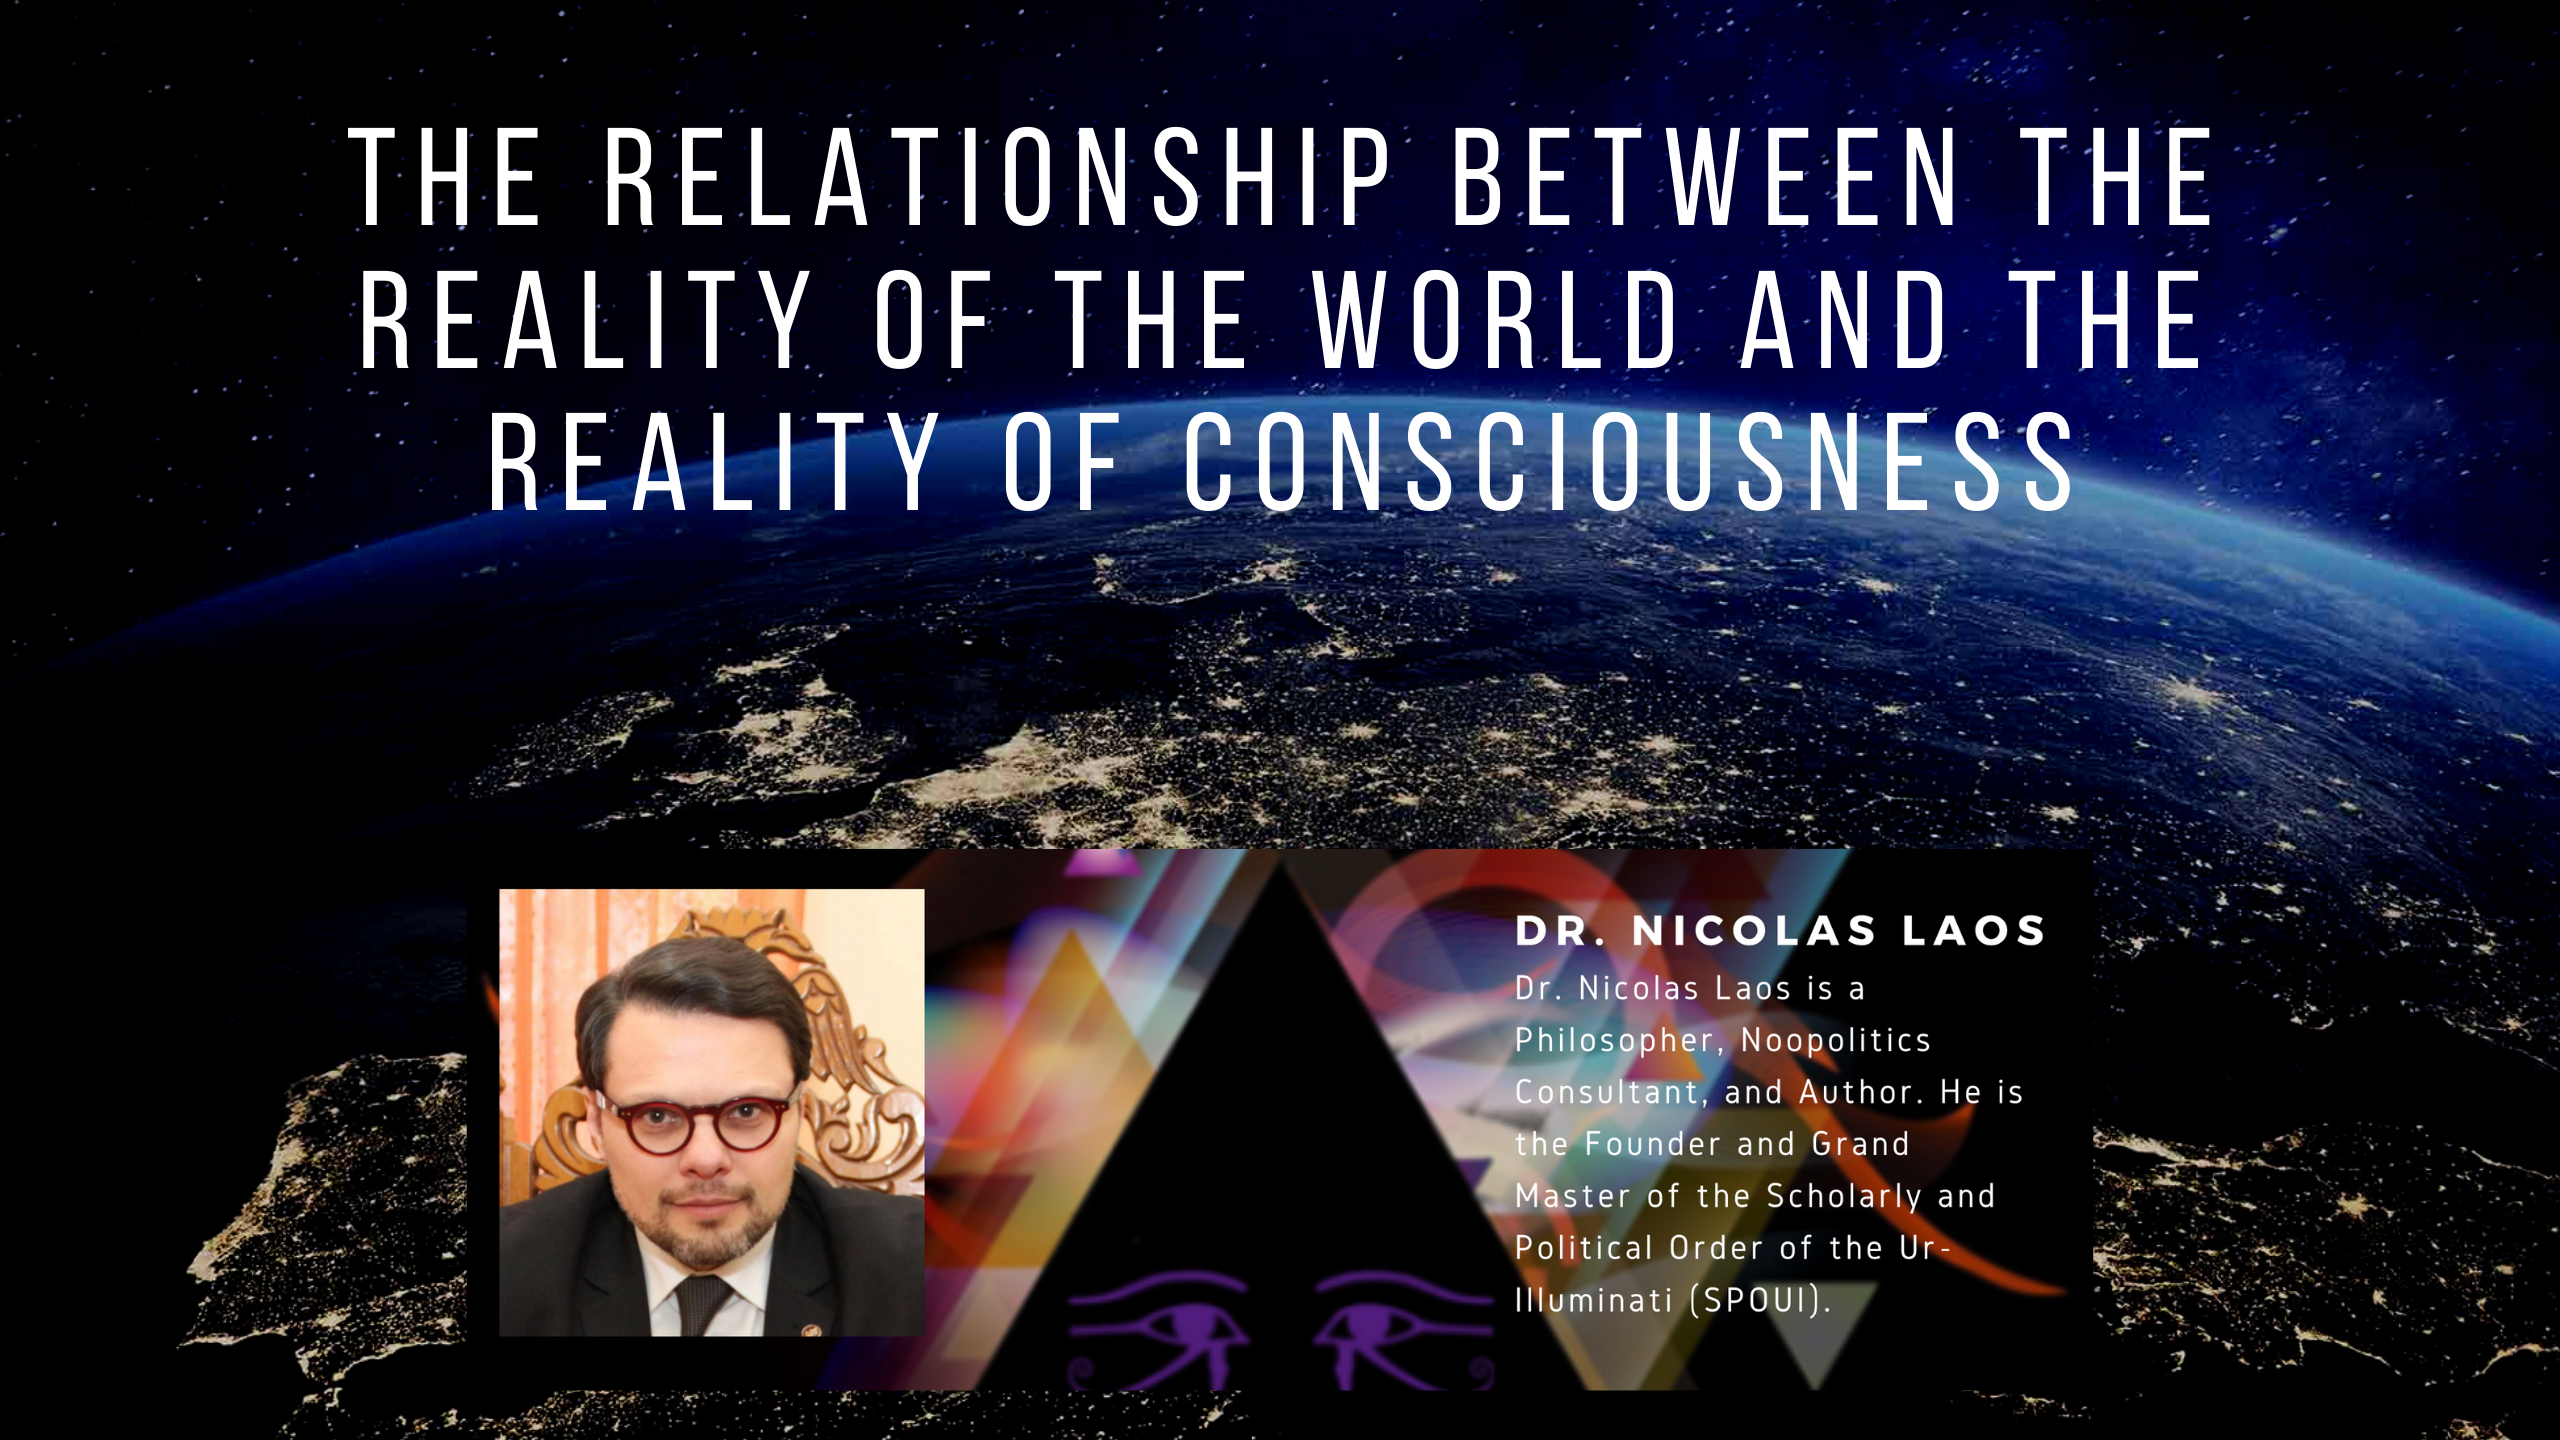 The Relationship Between the Reality of the World and the Reality of Consciousness